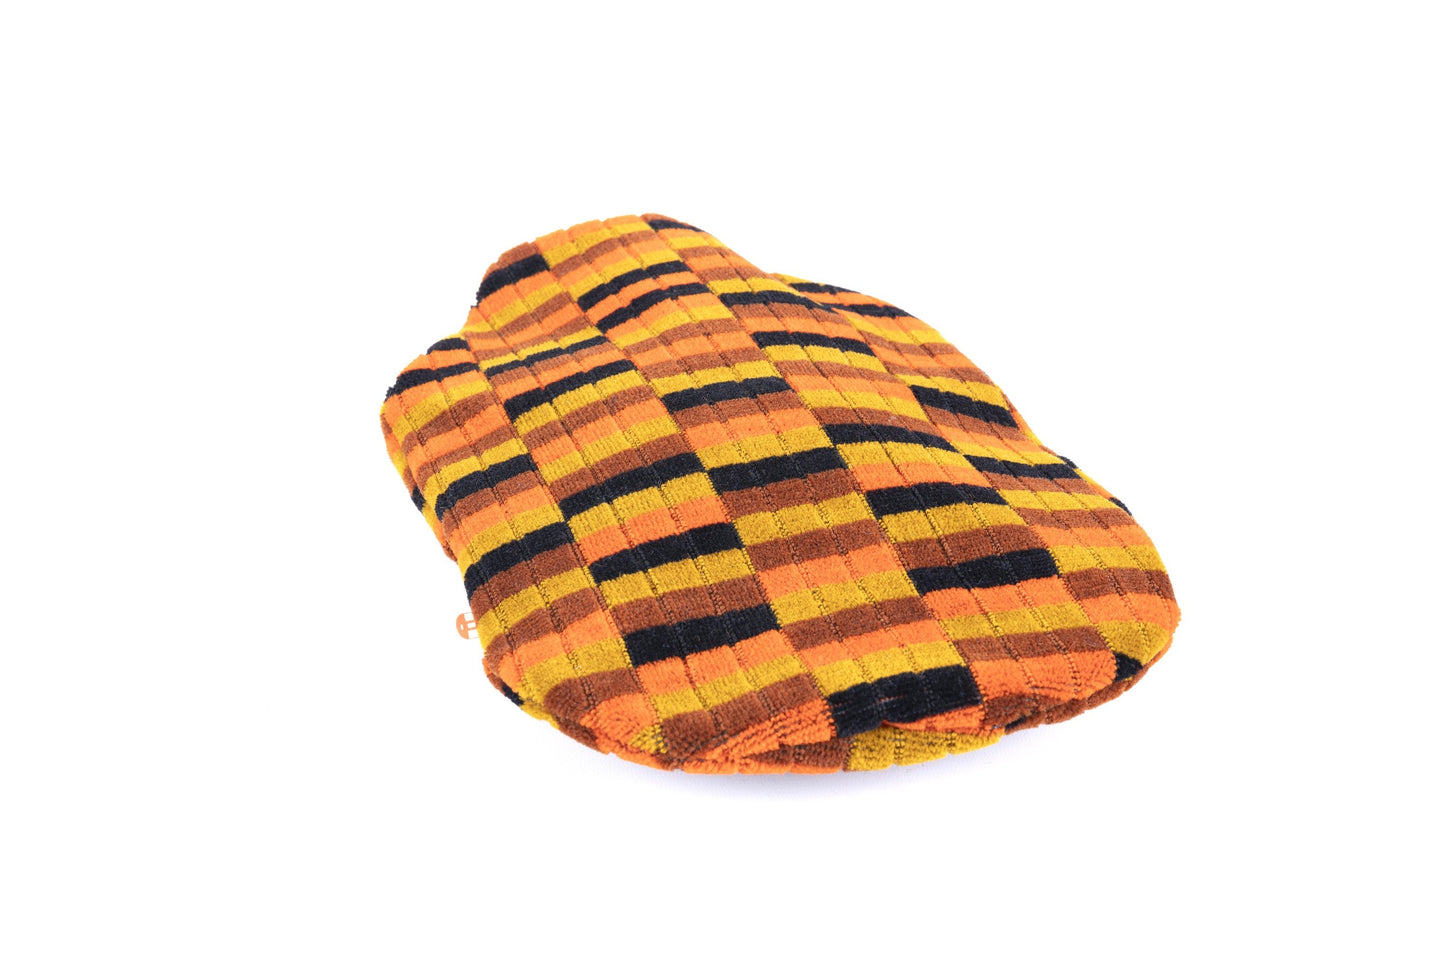 London Underground and London Bus  (Misha Black) District Line Moquette Hot Water Bottle Cover